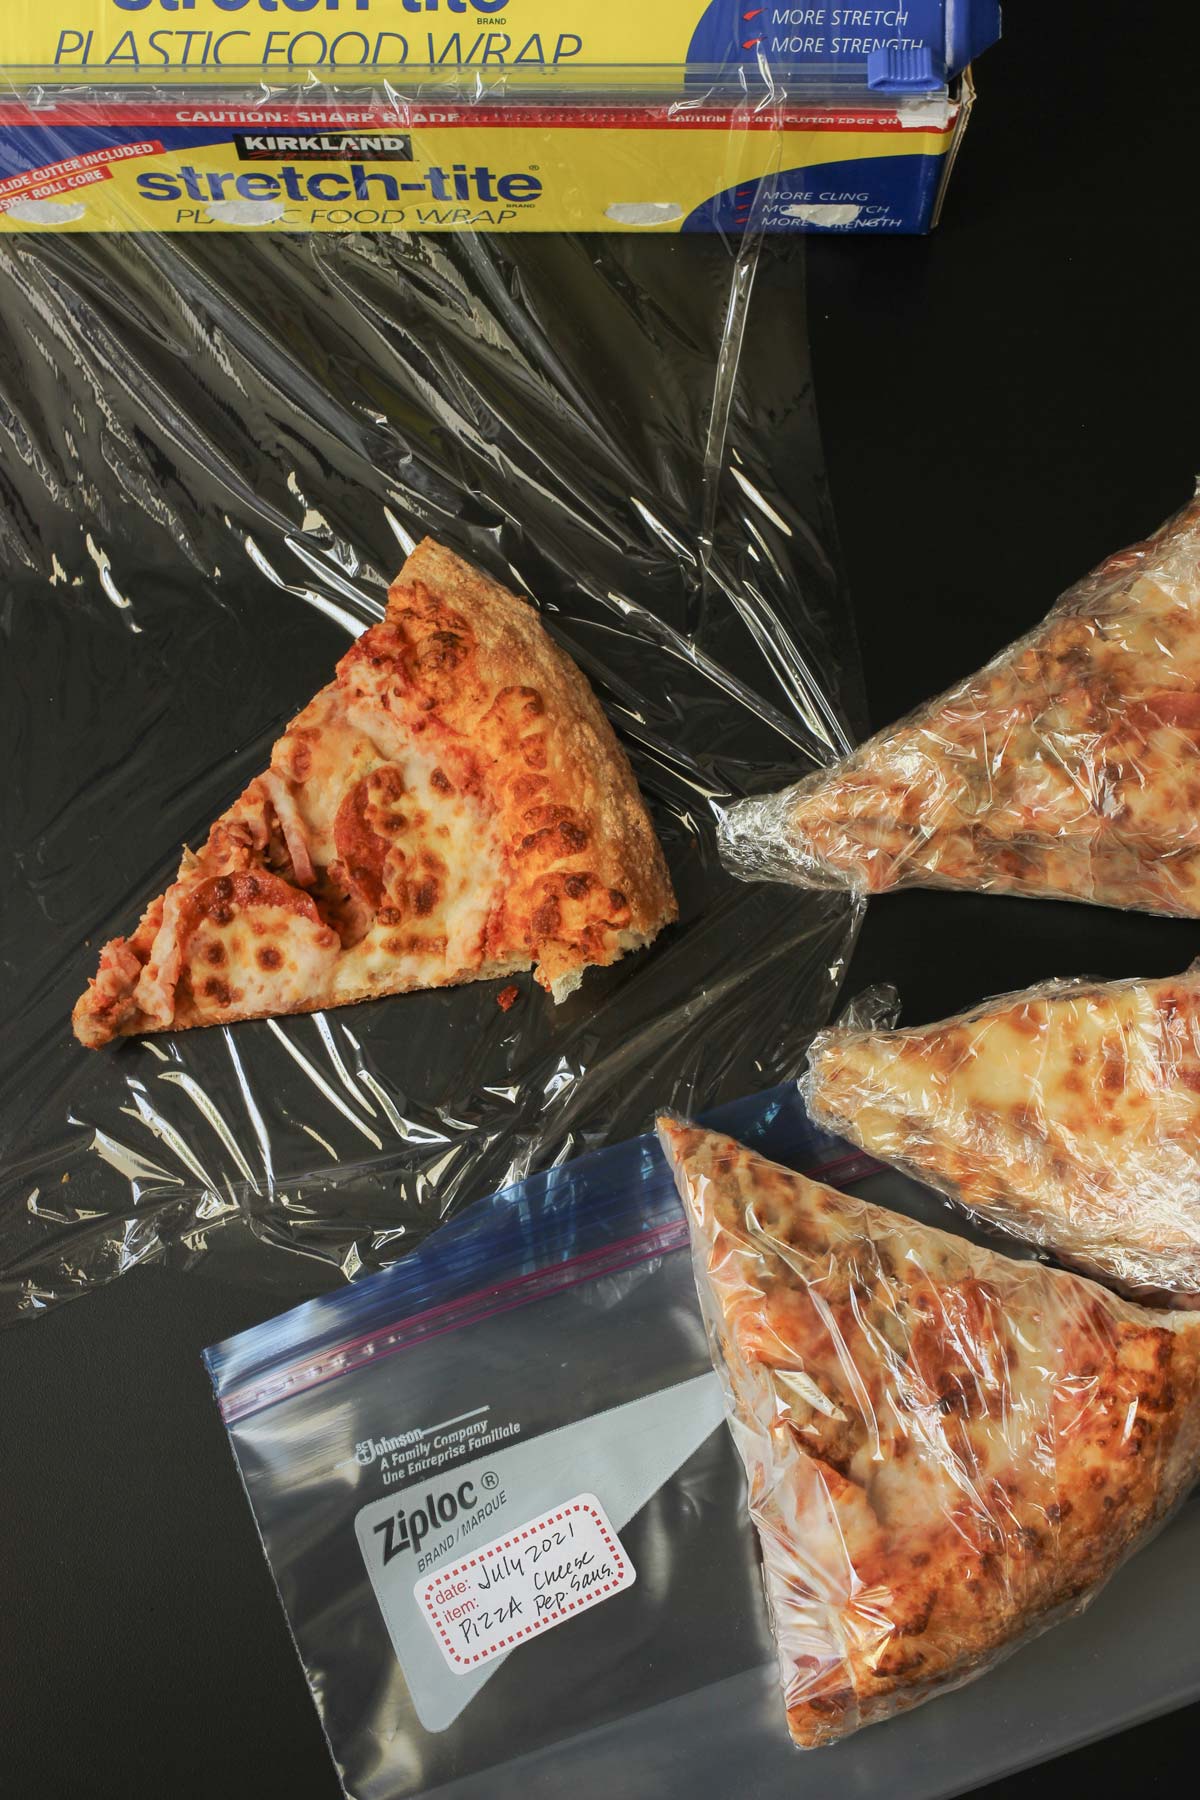 wrapping slices of pizza in plastic wrap.